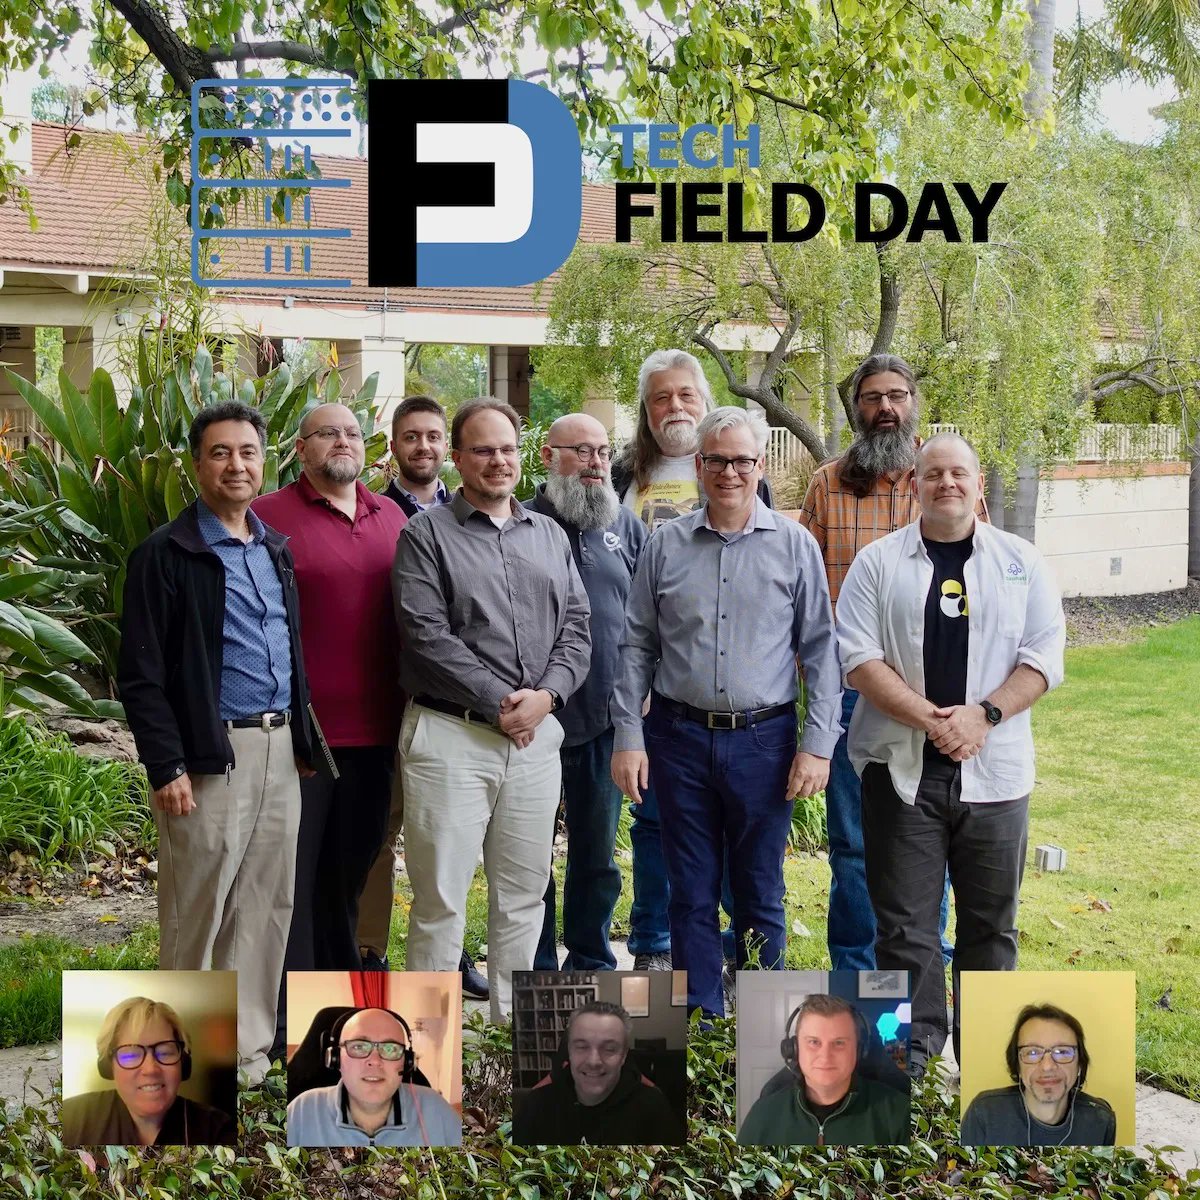 That's a wrap! Thank you @MenandMice, @KentikInc, @MemVerge, and Siamak Tavallaei from the #CXLConsortium for presenting at Tech Field Day 27 and making it another wonderful event. Thank you to our delegates for making @TechFieldDay possible! #TFD27 

tfd.bz/3Cv5SdU